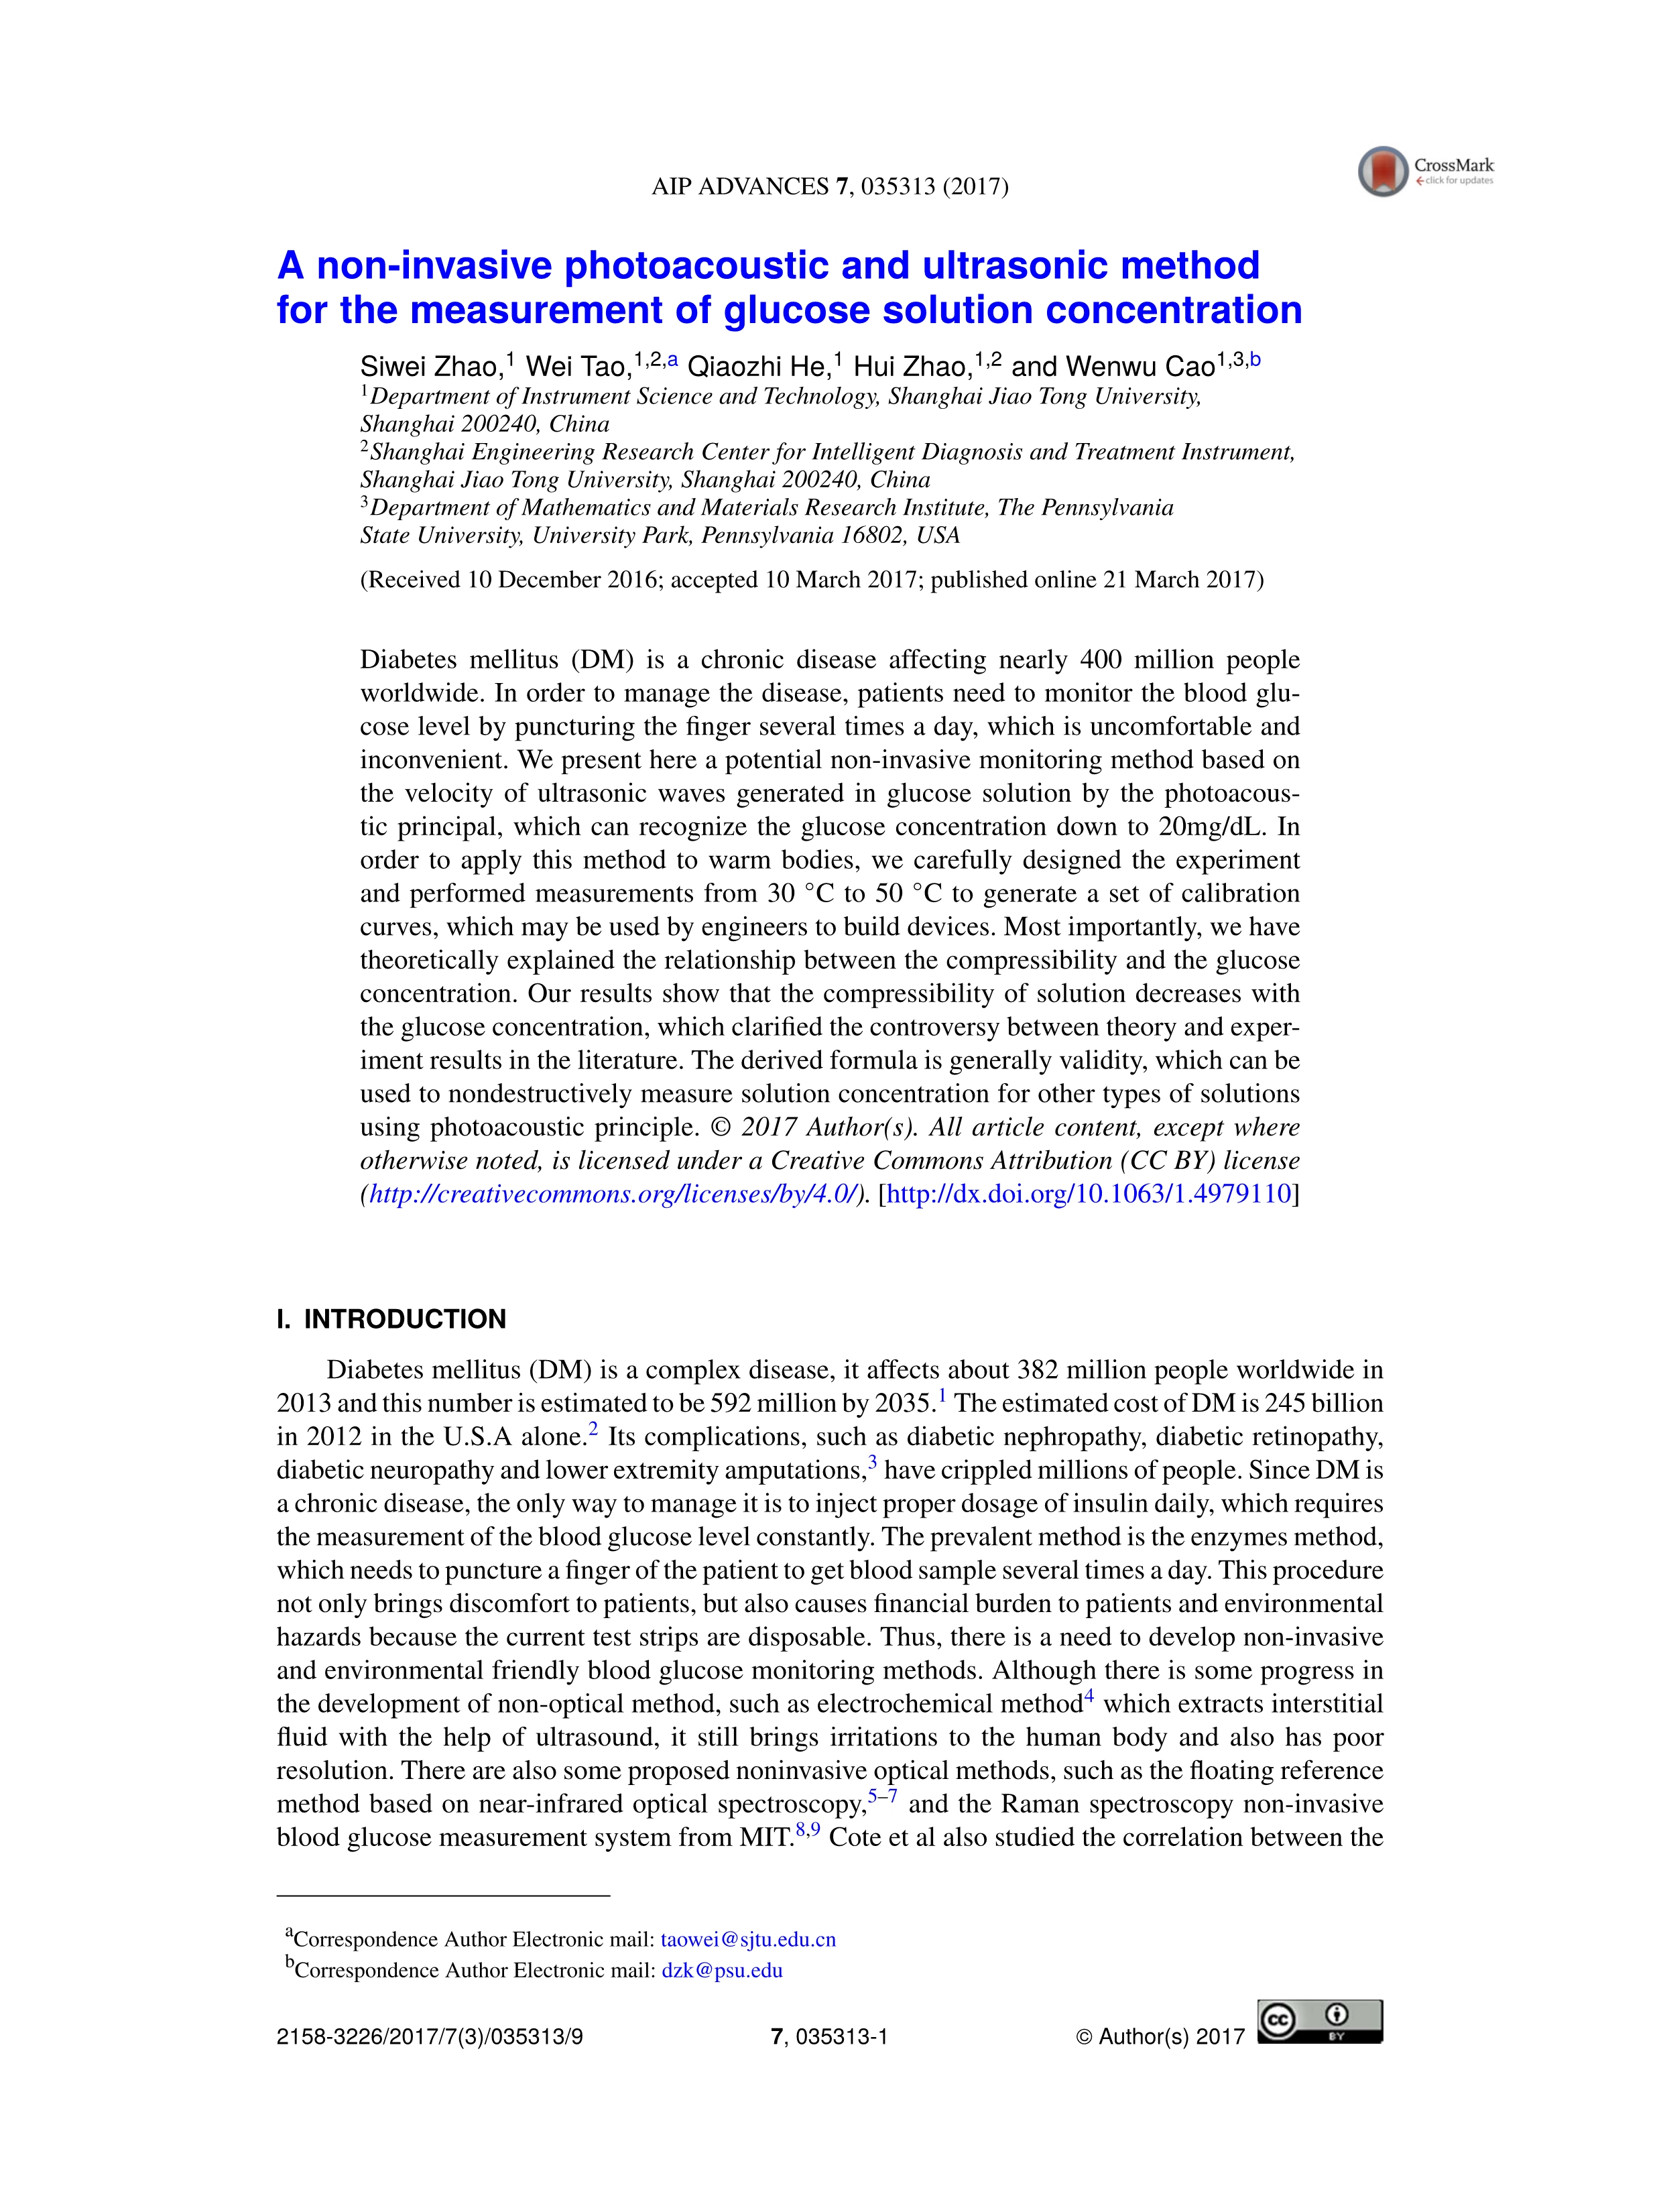 04 SCI论文-A non-invasive photoacoustic and ultrasonic method for the measurement of glucose solution concentration